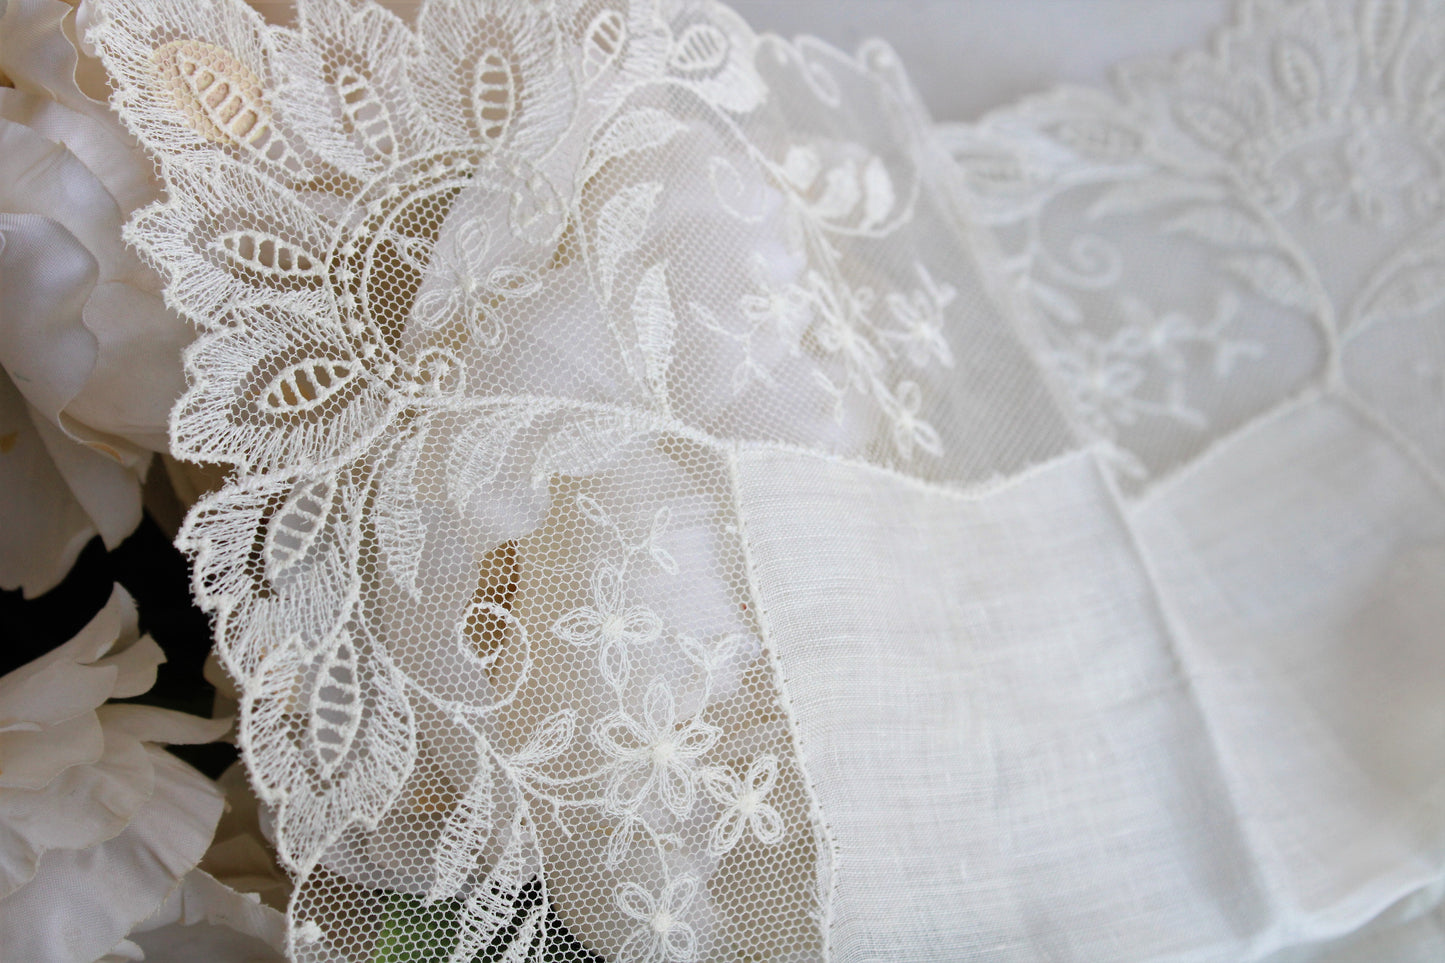 Vintage Linen Hanky with Lace Trim, New With Tag